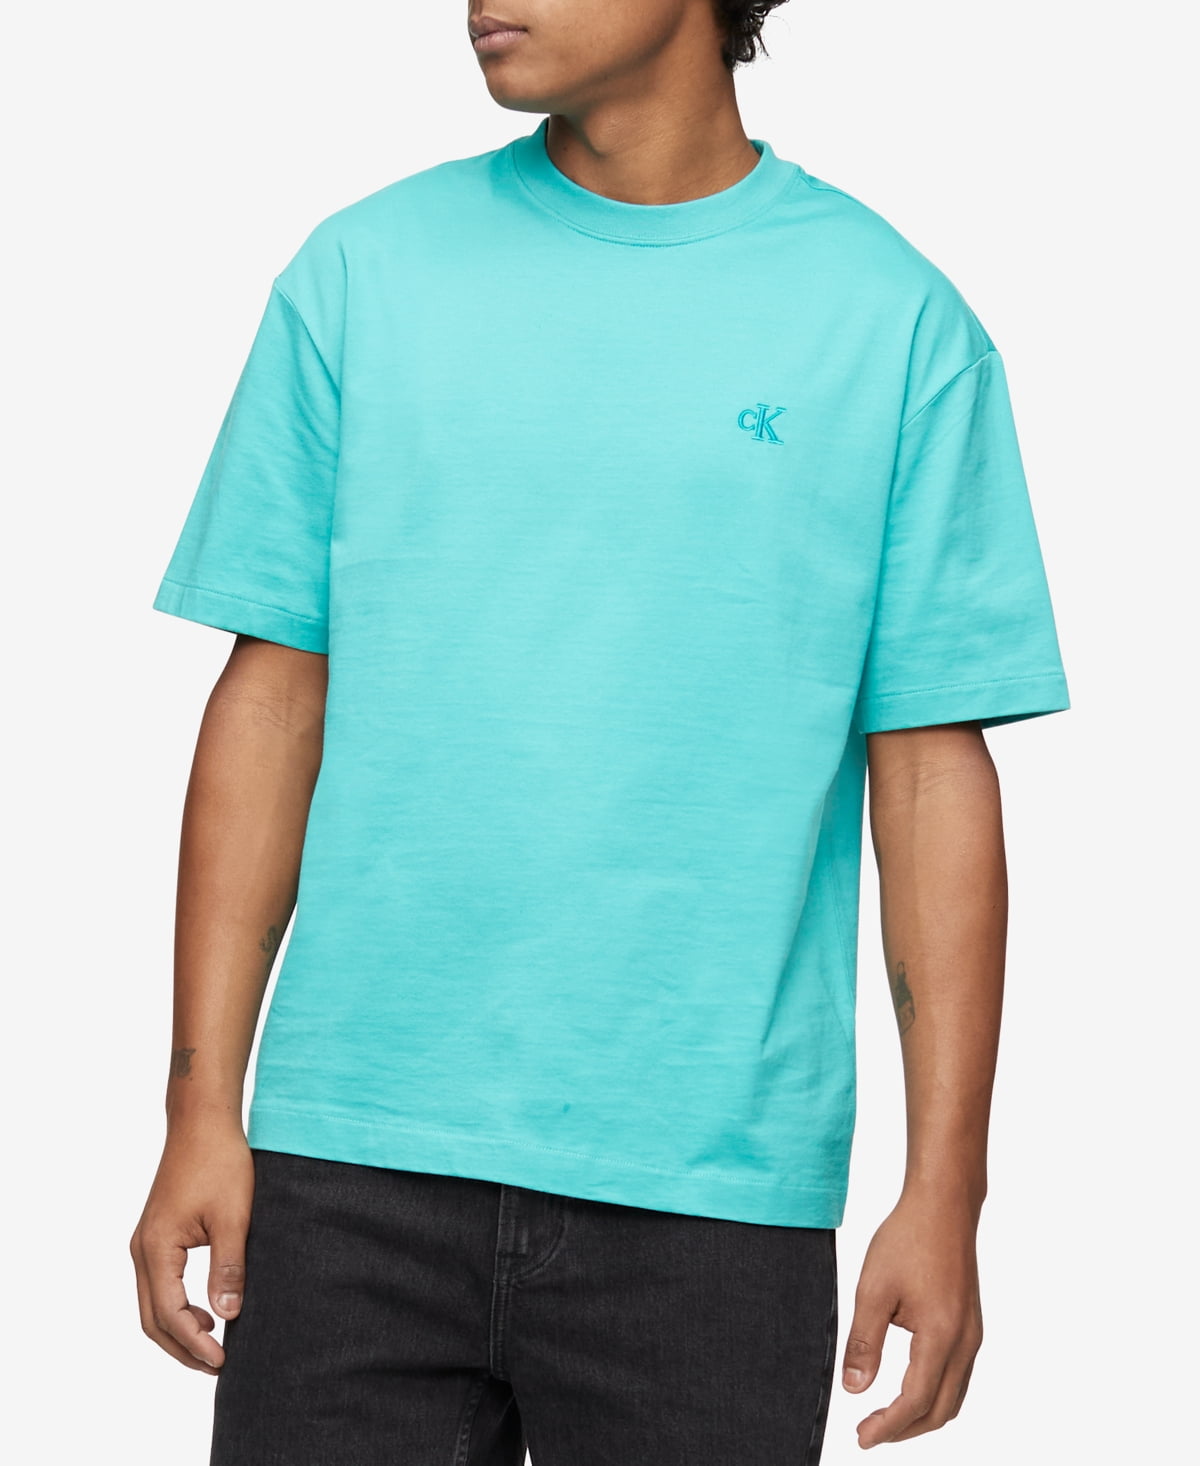 Calvin Klein Men's Relaxed Fit Archive Logo Crewneck T-Shirt, Turquoise,  Small